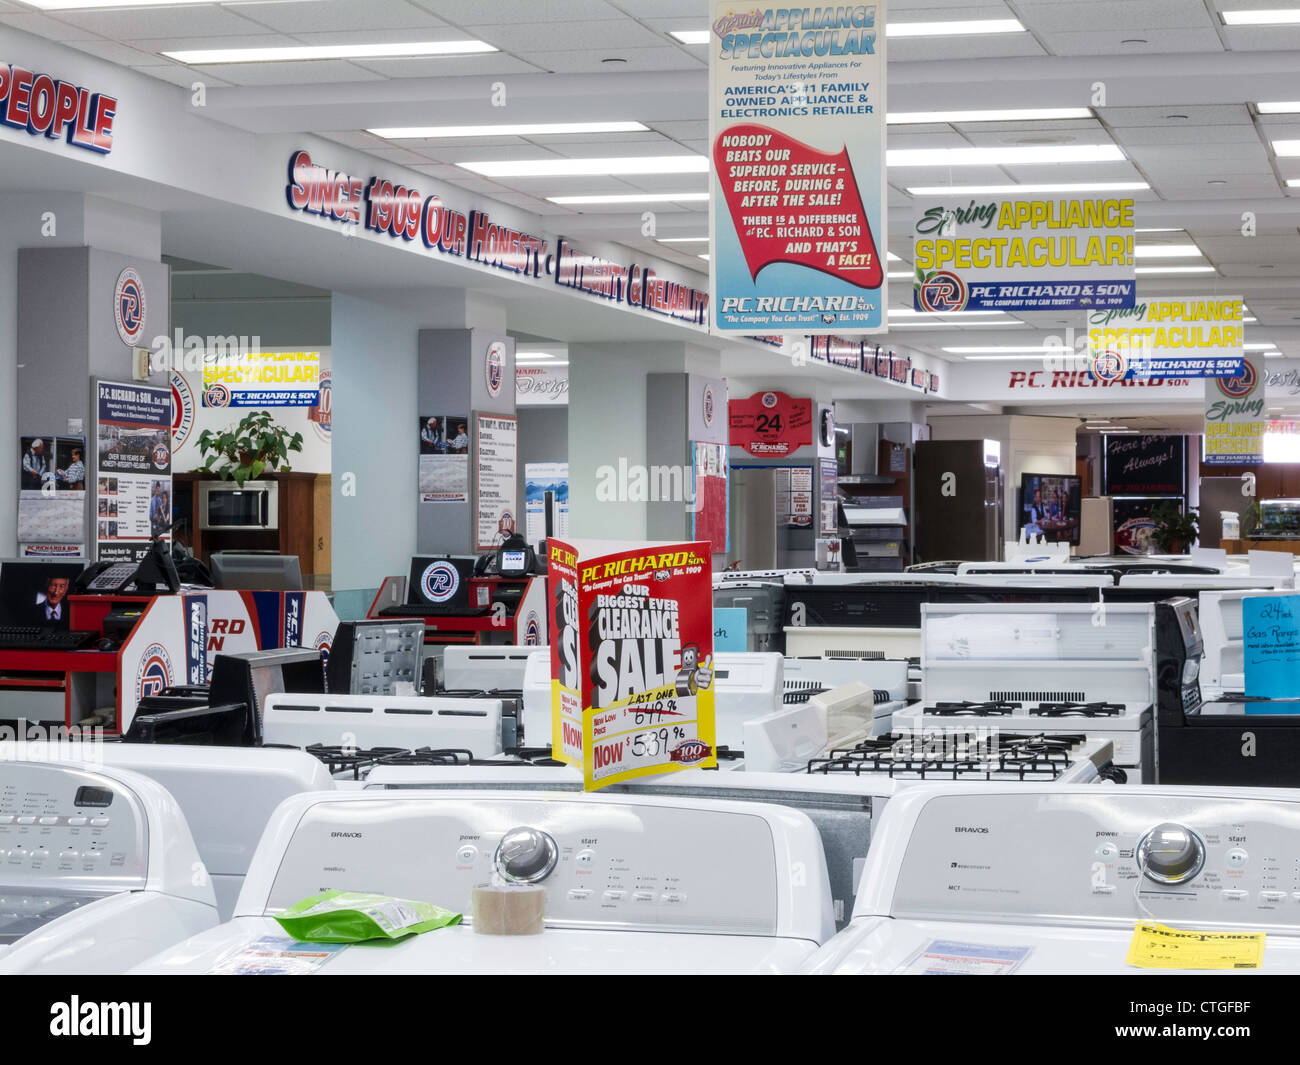 Household Appliances For Sale in Appliance Store Stock Photo